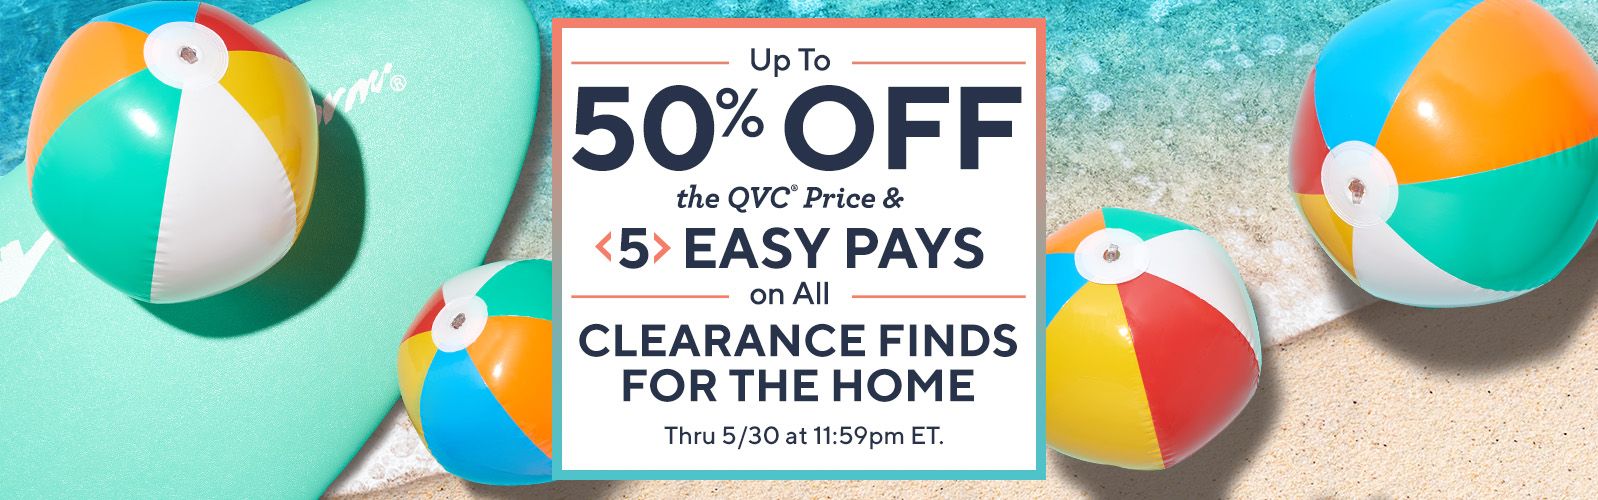 Up to 50% Off the QVC® Price & 5 Easy Pays on All Clearance Finds for the Home  Thru 5/30 at 11:59pm ET